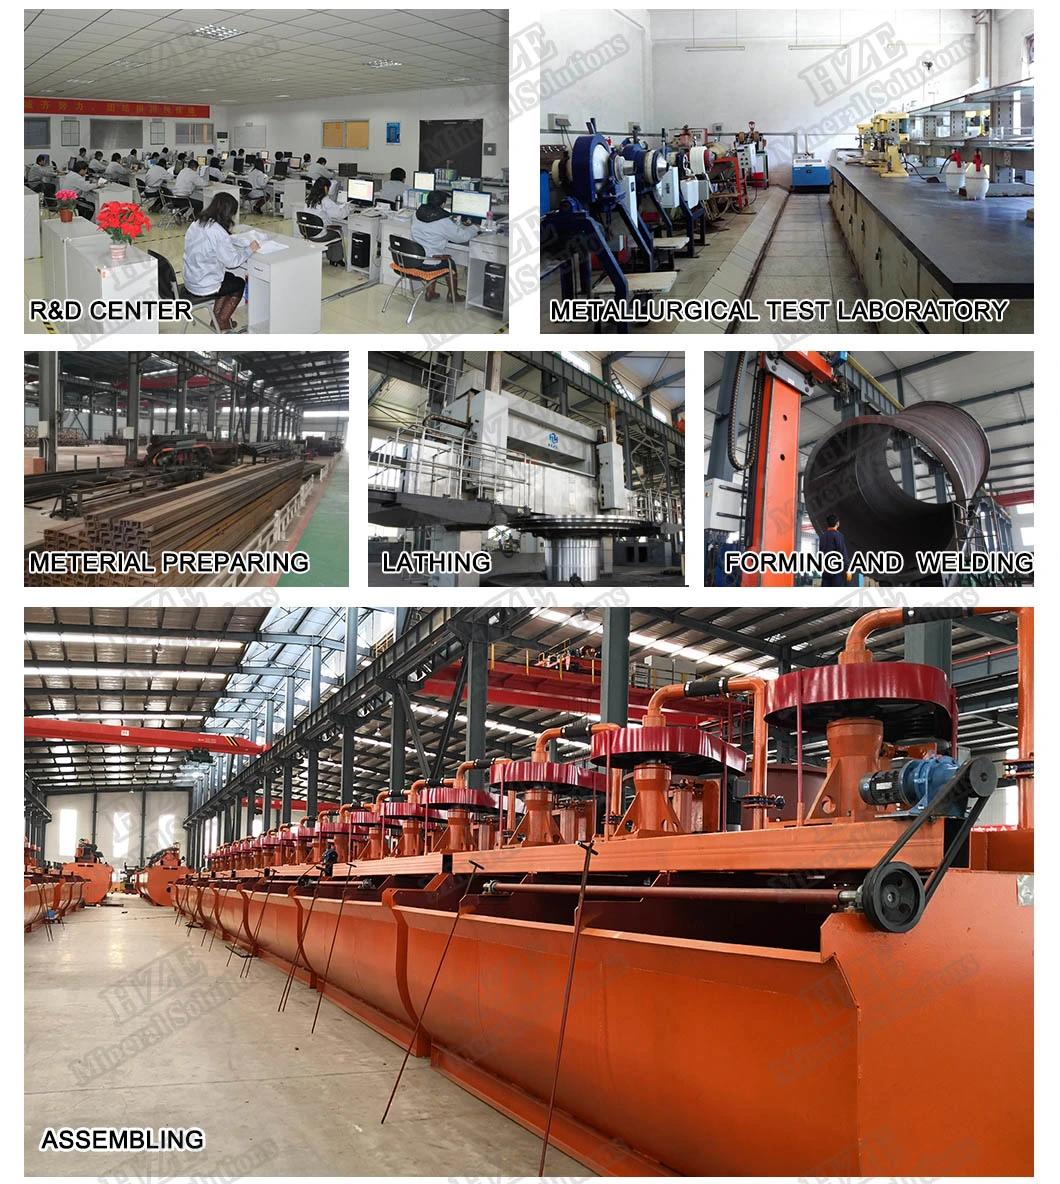 Mining Equipment Quartz Sand Forced Air Flotation Cell of Processing Plant